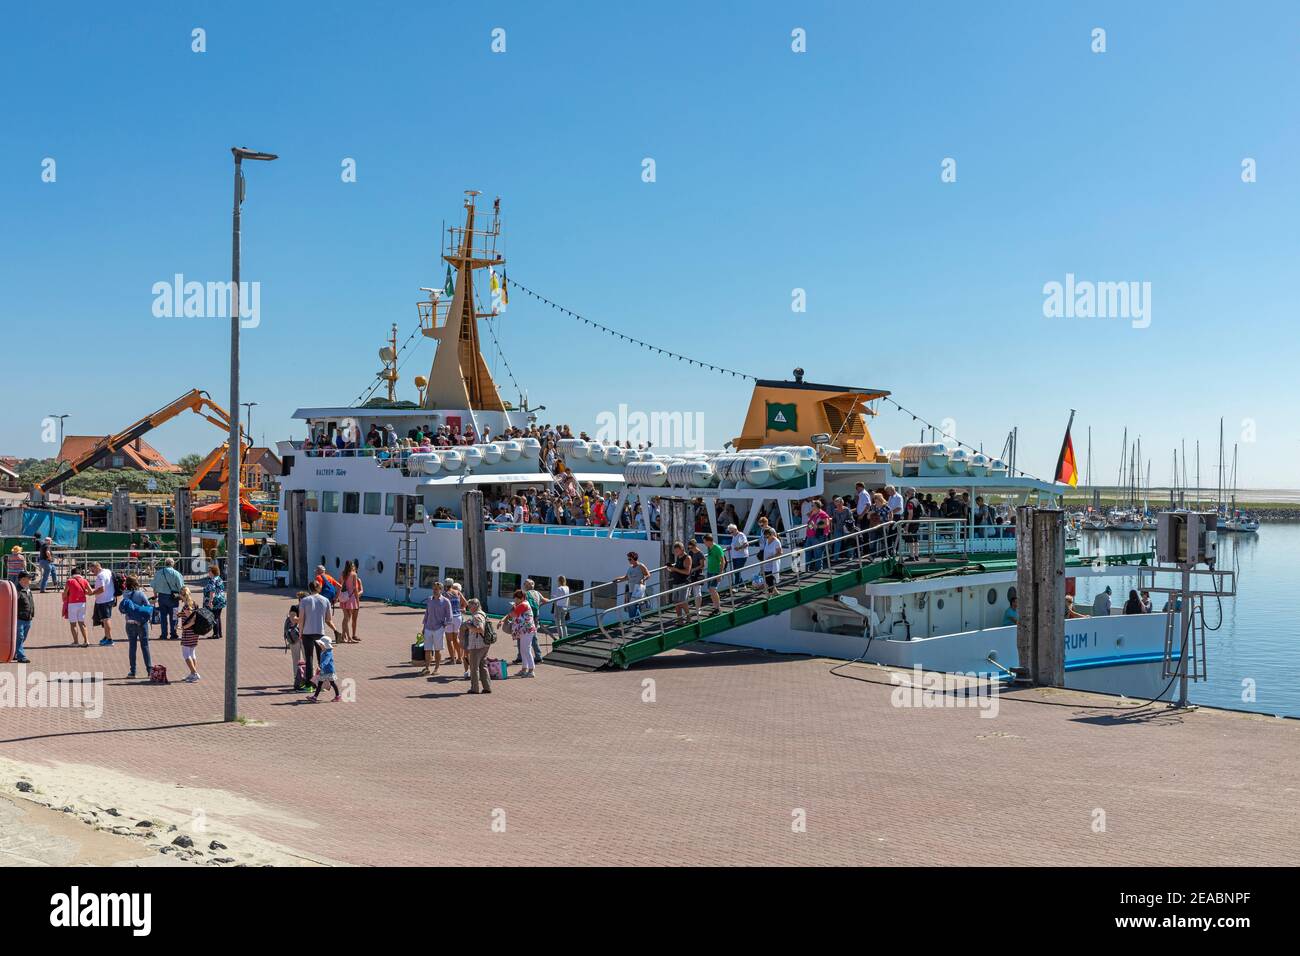 Vacationers leave the ferry 'Baltrum l' in the port of Baltrum, East Frisian island, Baltrum, Lower Saxony, Stock Photo